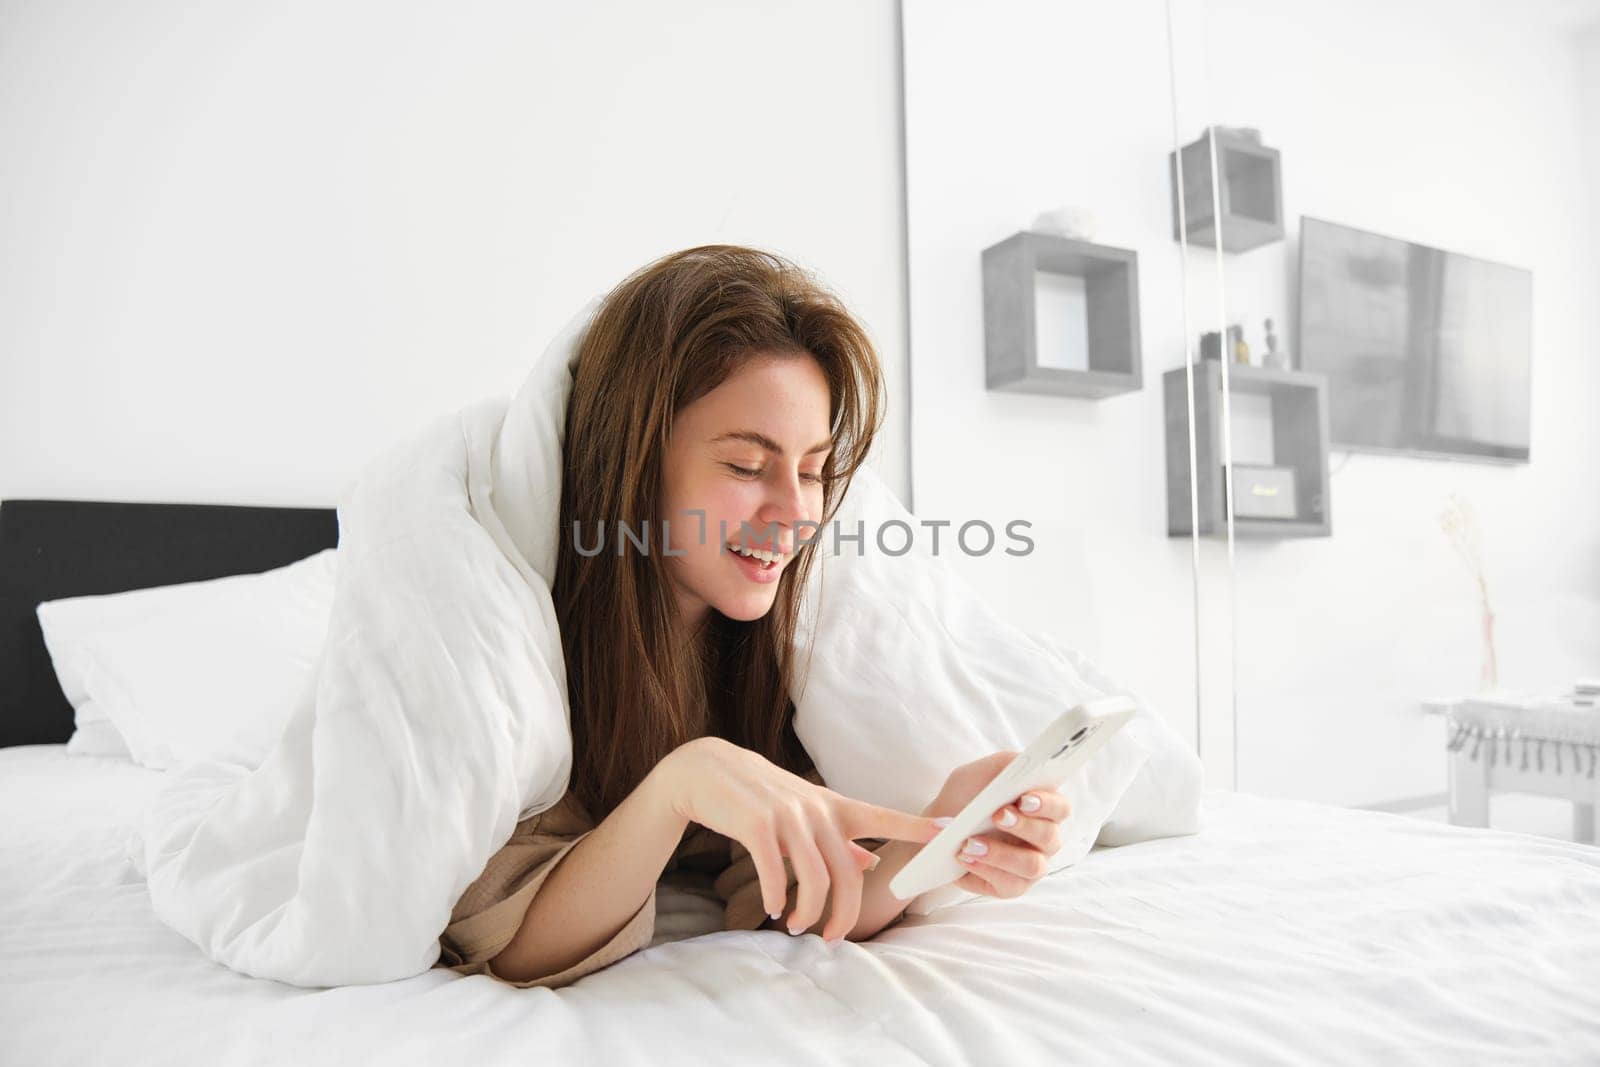 Portrait of beautiful brunette woman with smartphone, relaxing in her bed under blankets and smiling, checking social media feed on mobile phone app, wrap herself in duvet and enjoying lazy morning.